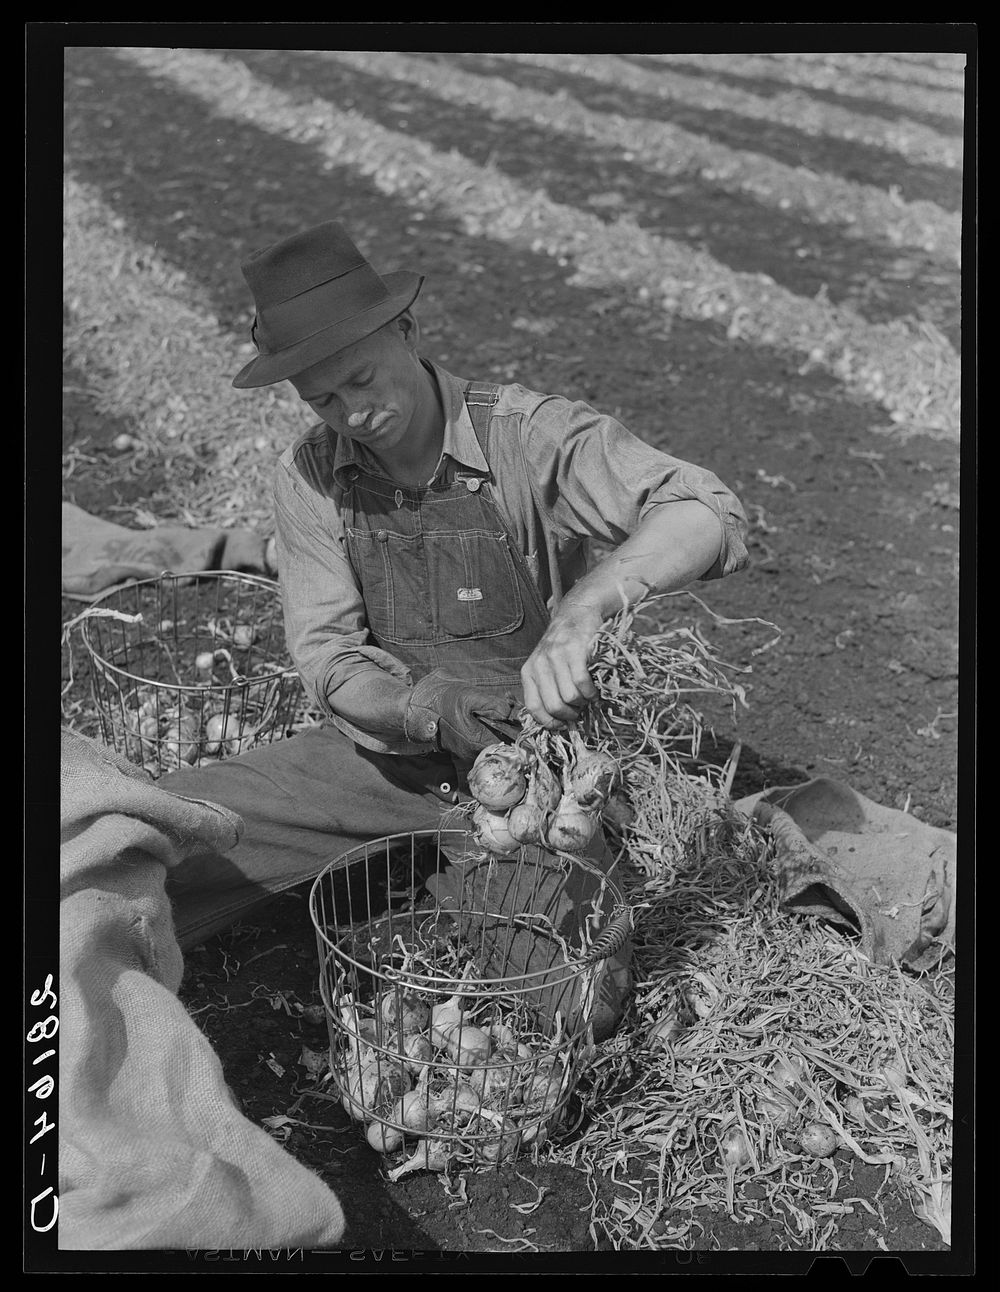 Onion picker. Rice County, Minnesota. Sourced from the Library of Congress.